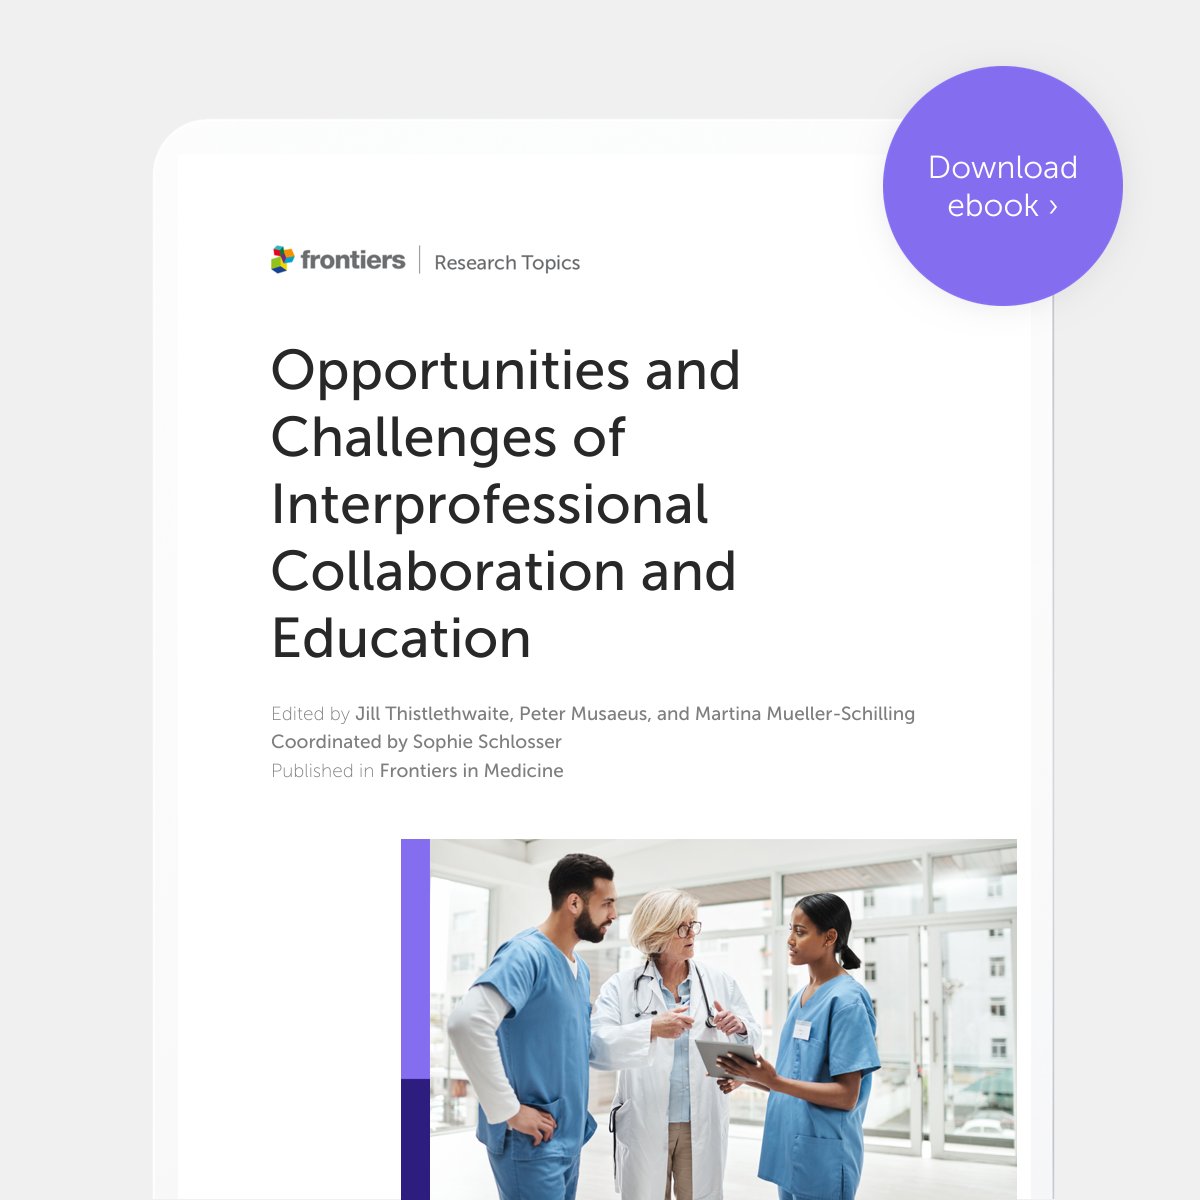 New eBook available! 🎉 'Opportunities and Challenges of Interprofessional Collaboration and Education' Edited by Jill Thistlethwaite, Peter Musaeus, and Martina Mueller-Schilling Download the eBook or browse the collection 👉 fro.ntiers.in/50186